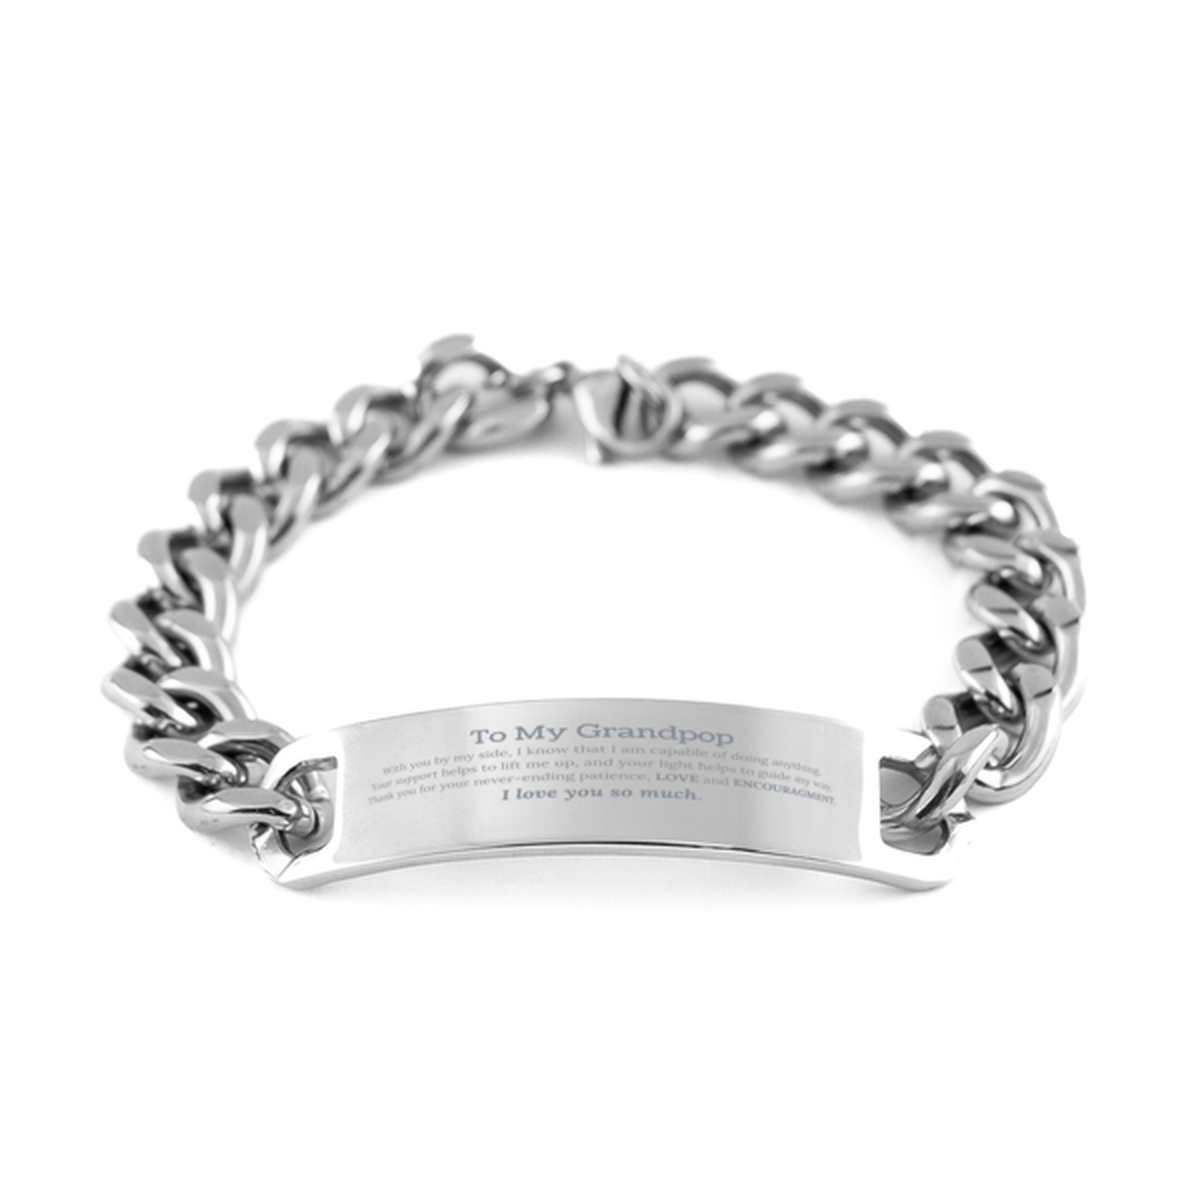 Appreciation Grandpop Cuban Chain Stainless Steel Bracelet Gifts, To My Grandpop Birthday Christmas Wedding Keepsake Gifts for Grandpop With you by my side, I know that I am capable of doing anything. I love you so much